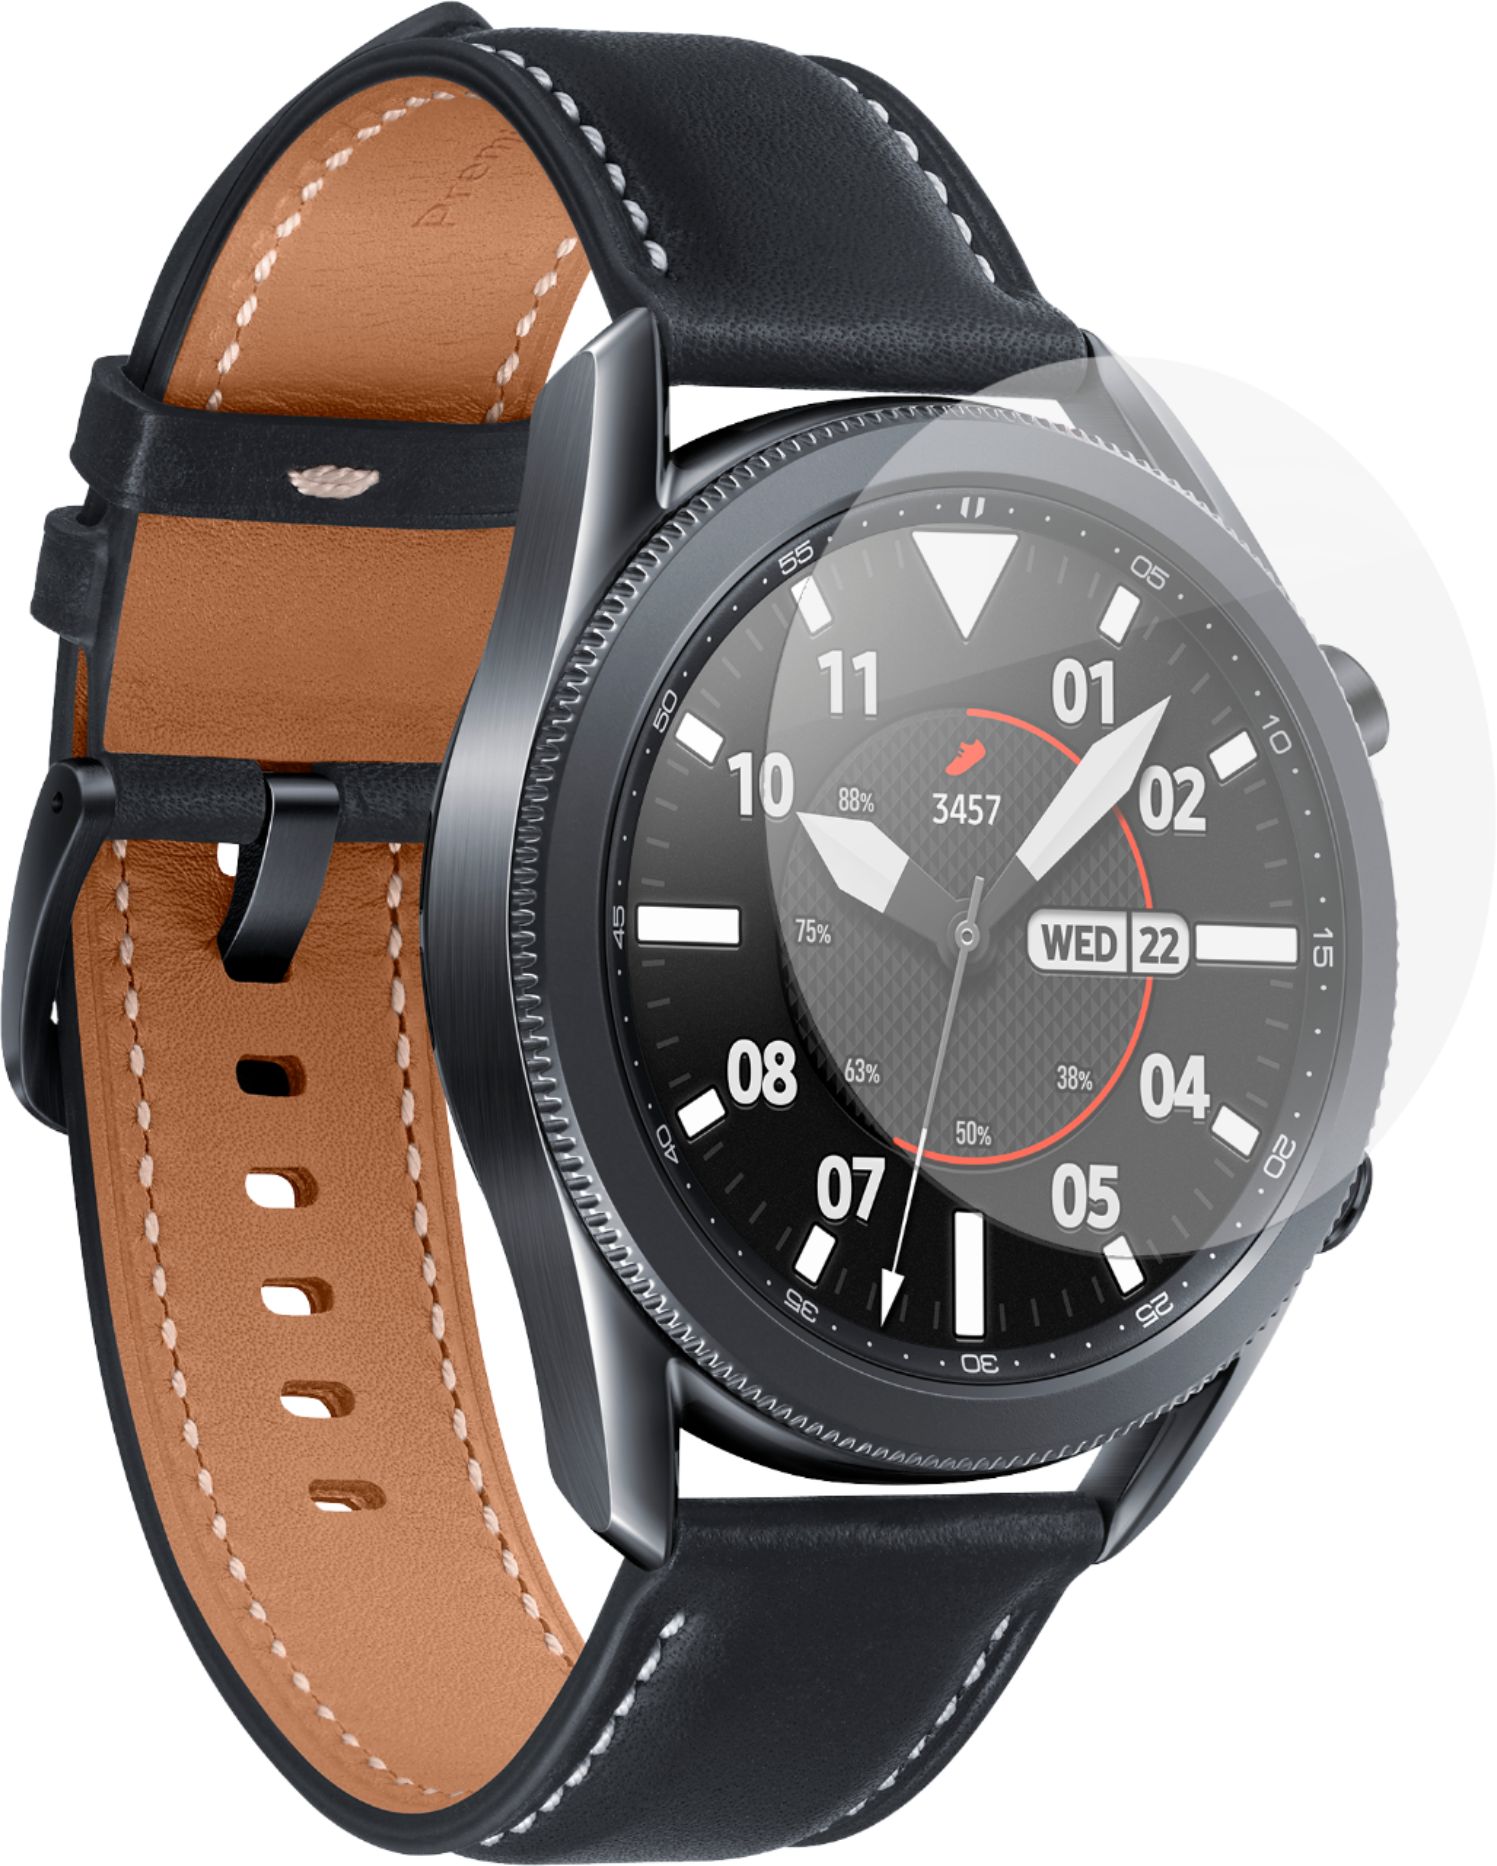 Left View: ZAGG - InvisibleShield GlassFusion+ Flexible Hybrid Screen Protector for Samsung Galaxy Watch3 45mm